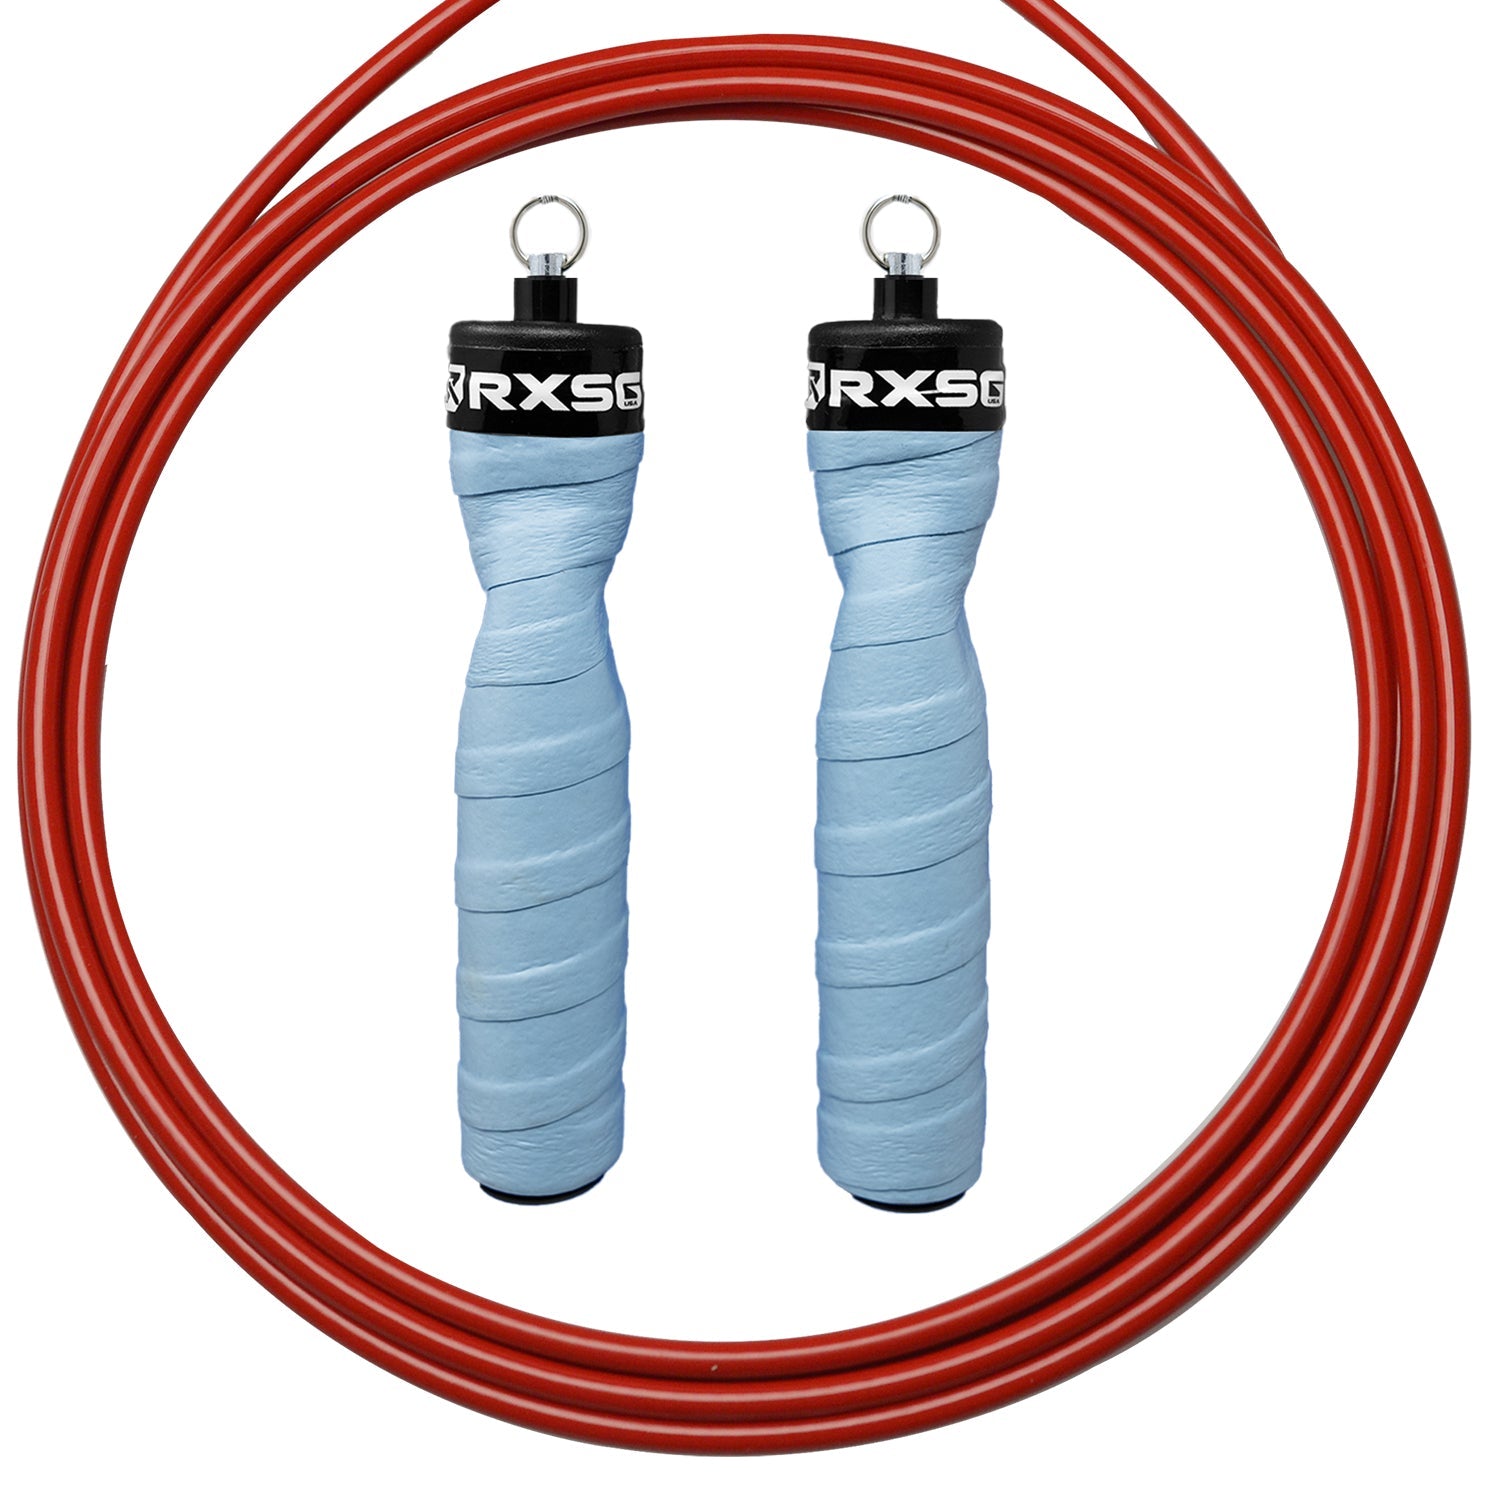 CustomFit Skye Jump Rope with red cable